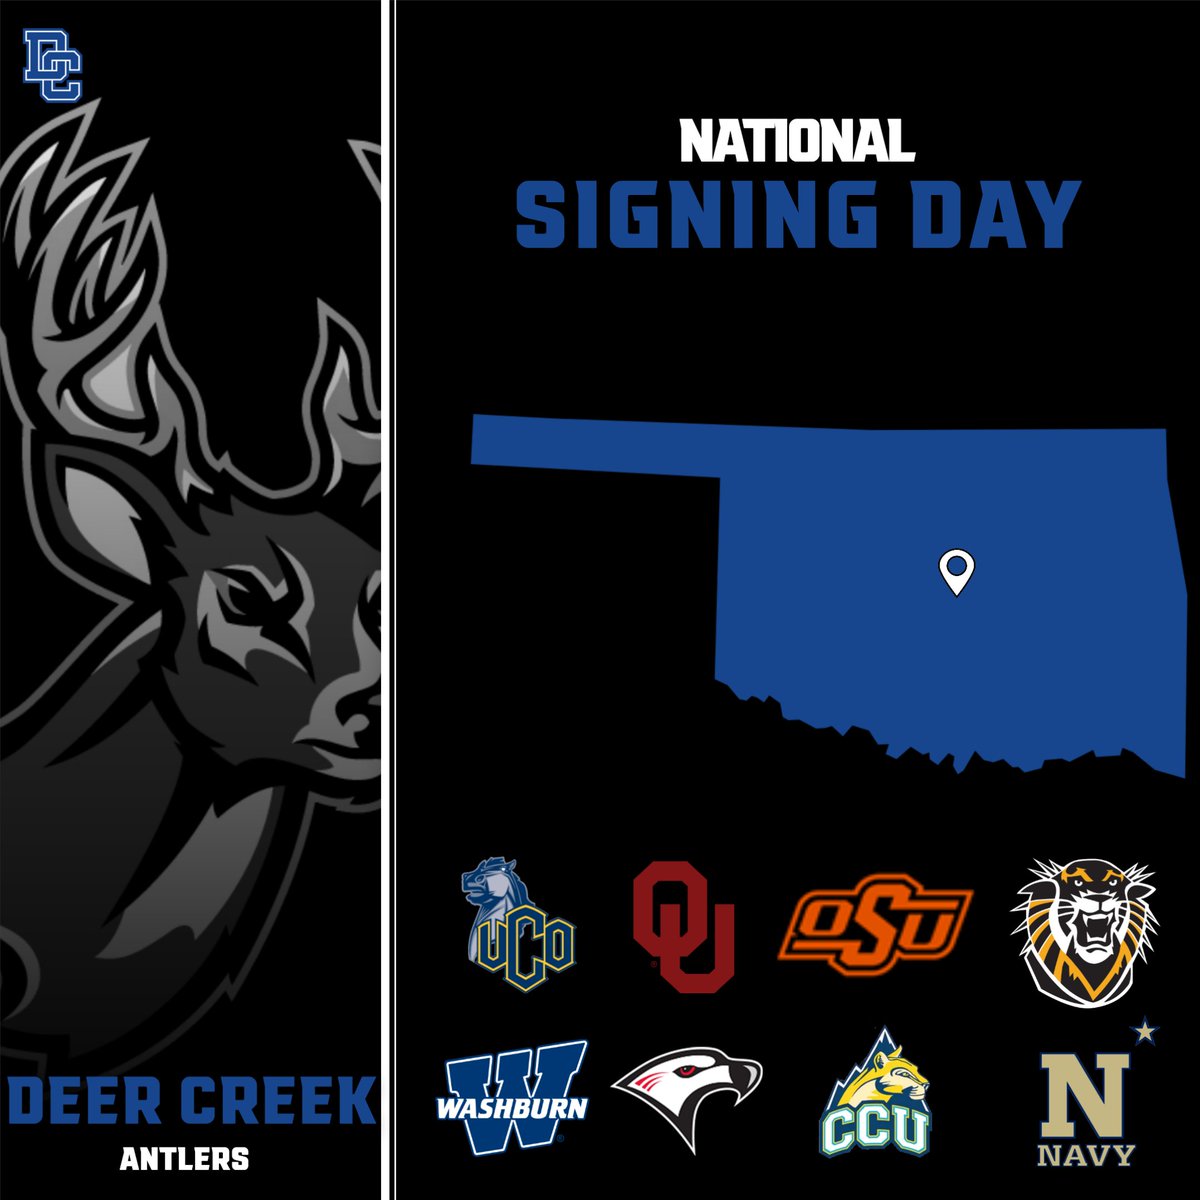 It's National Signing Day!! Come to the PAAC at 2:30 to see our awesome Student-Athletes sign to compete at the next level! #GOCREEK